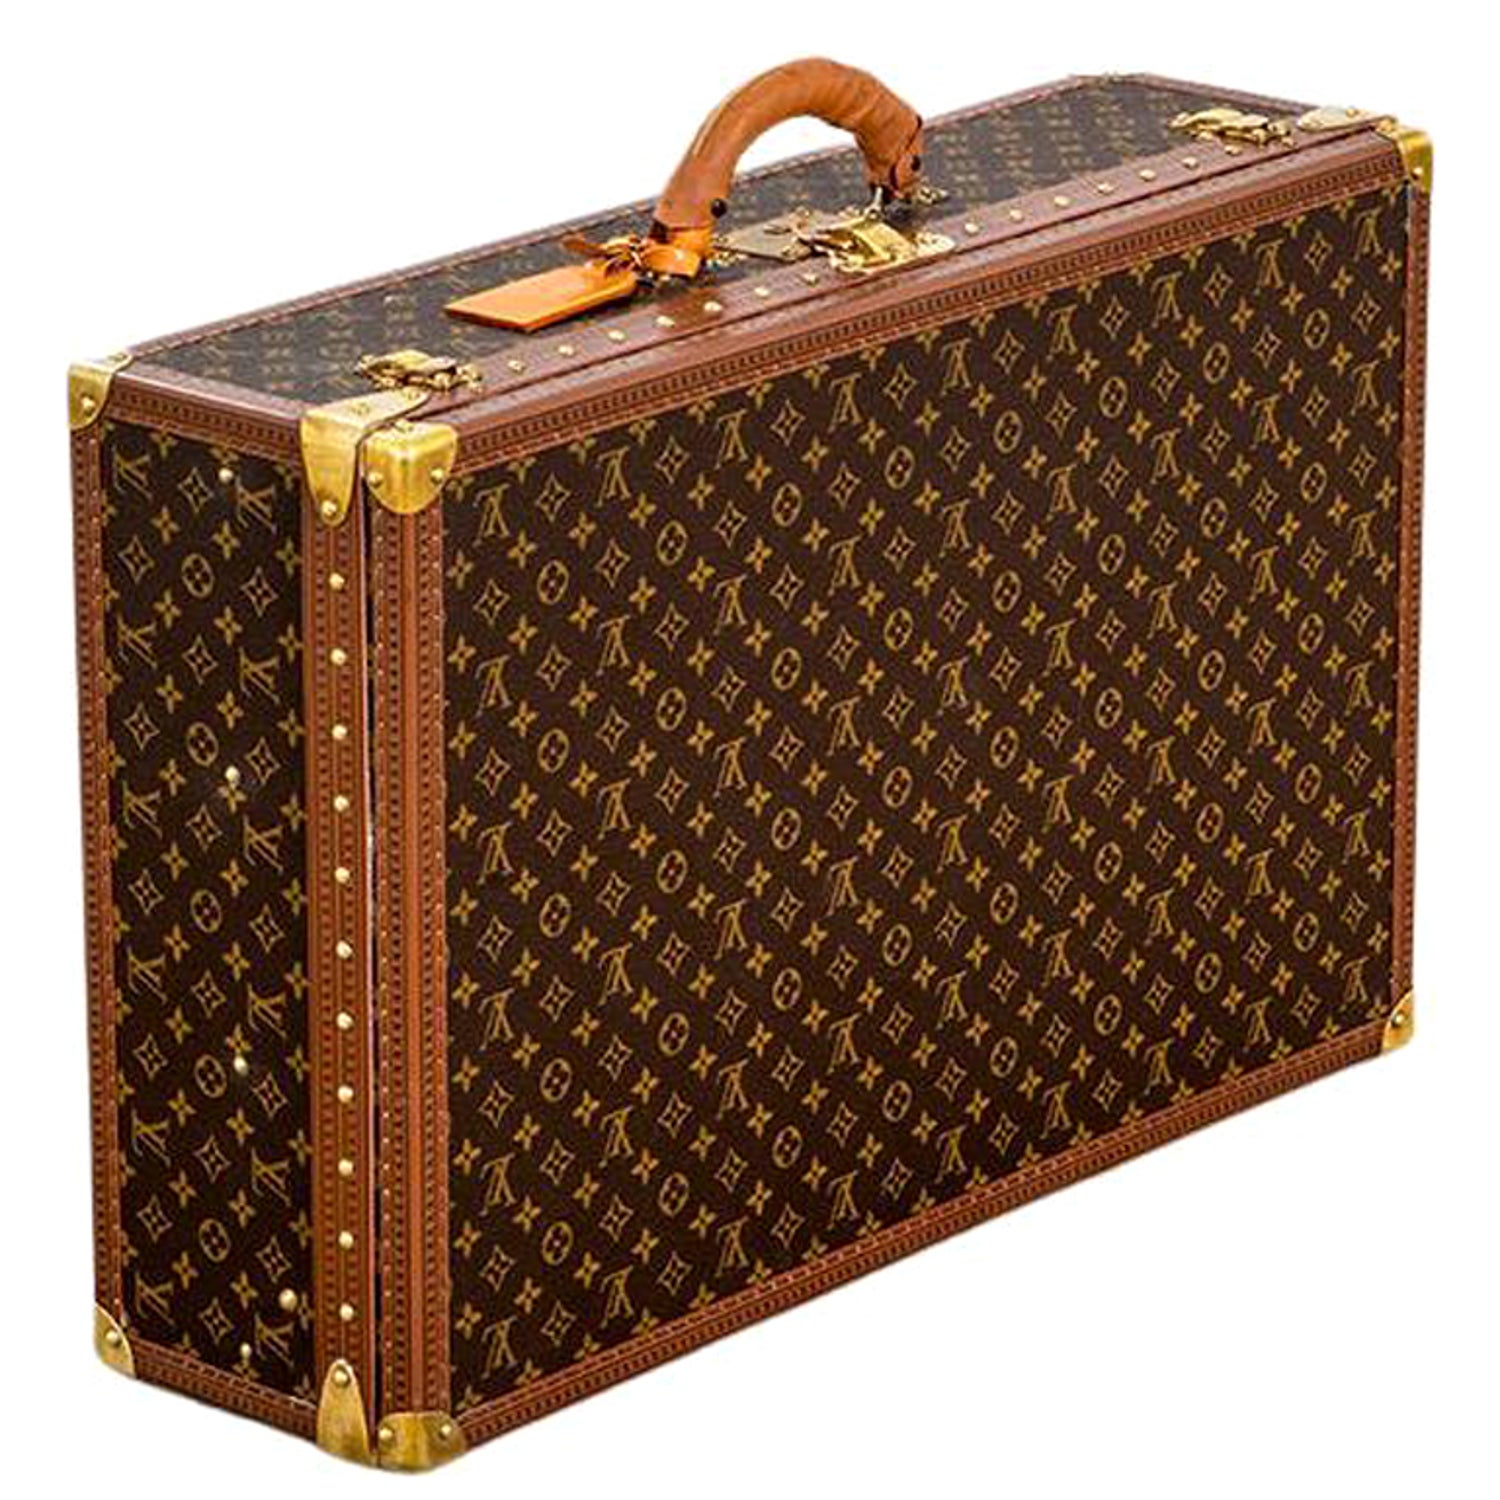 Louis Vuitton Luggage Fashionista inspired 5x7 Poster or Sign